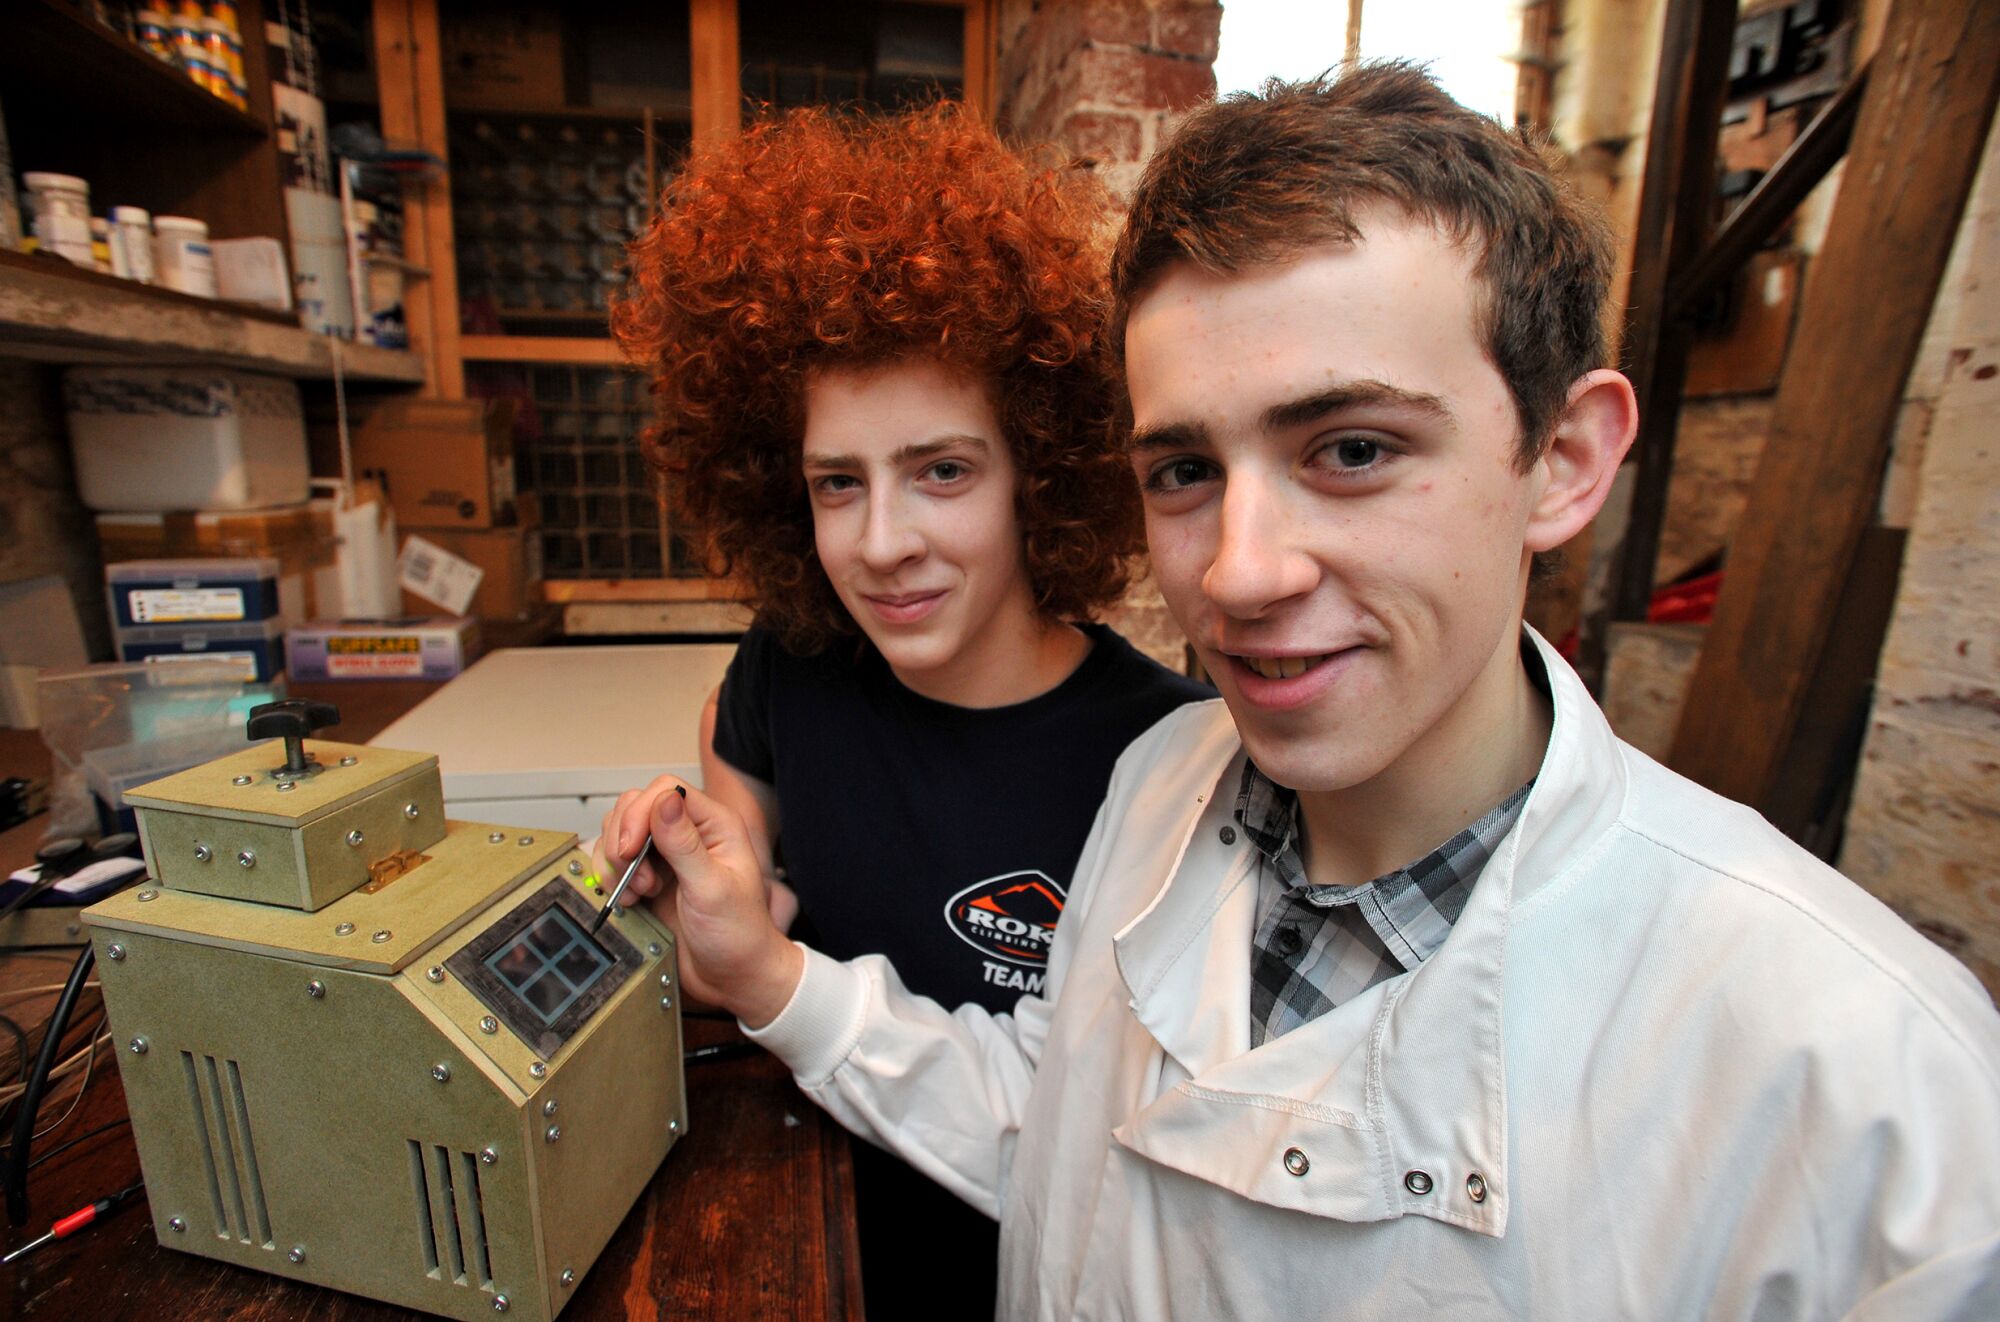 Fred Turner, at age 17, with his homemade PCR machine and his younger brother, Gus.